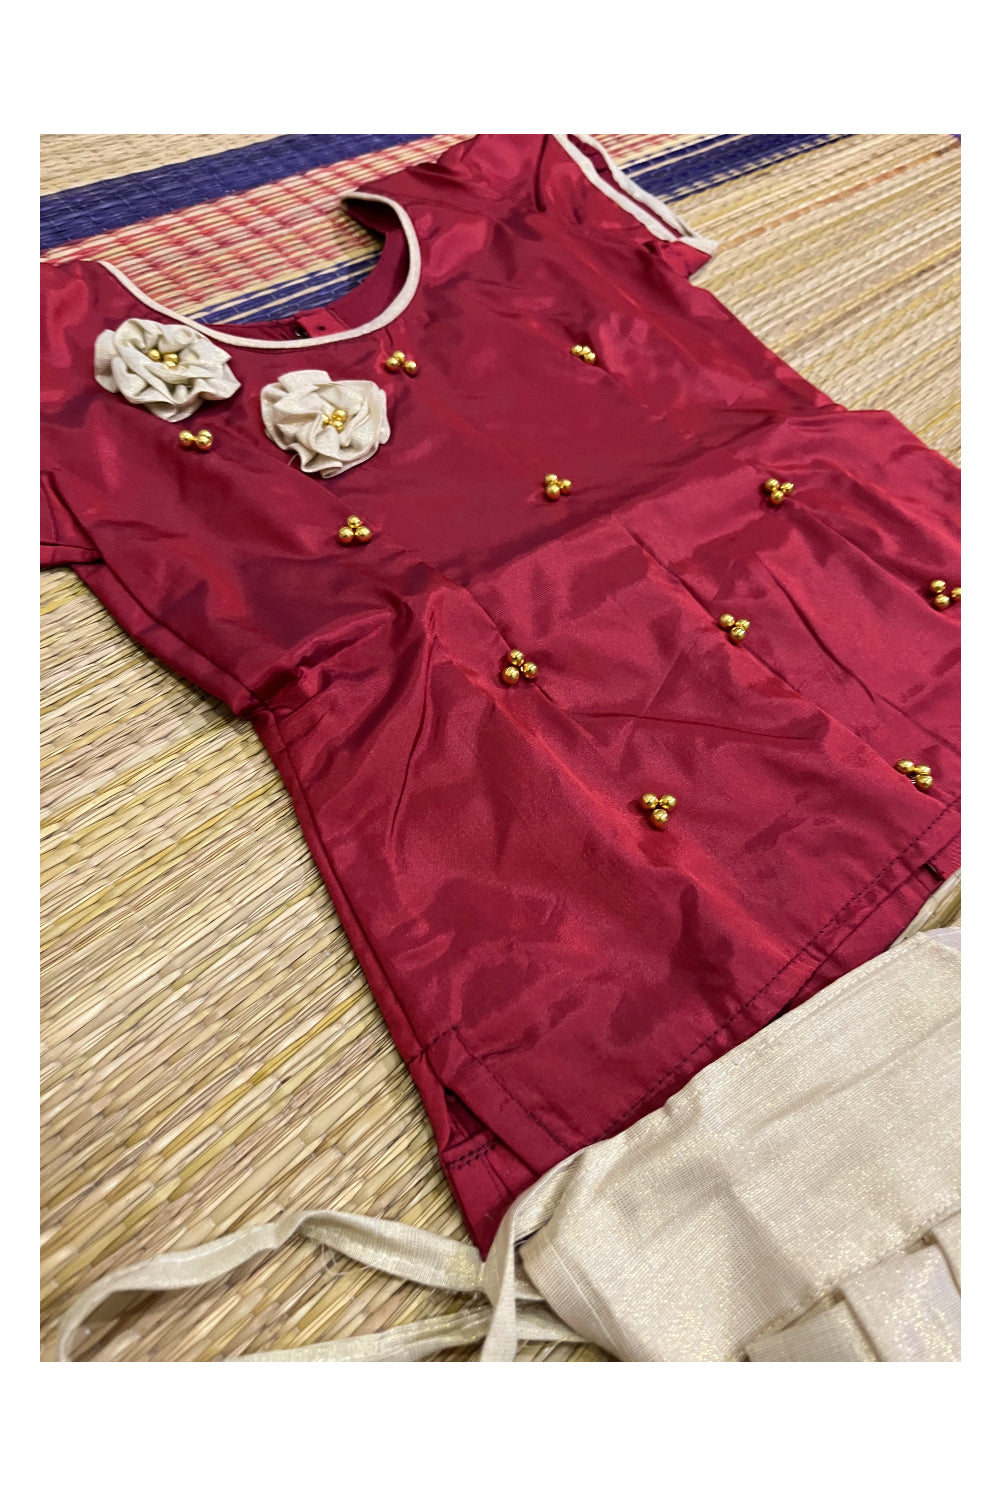 Southloom Kerala Maroon Pavada Blouse with Bead Work for Kids (Age 1 - 10)